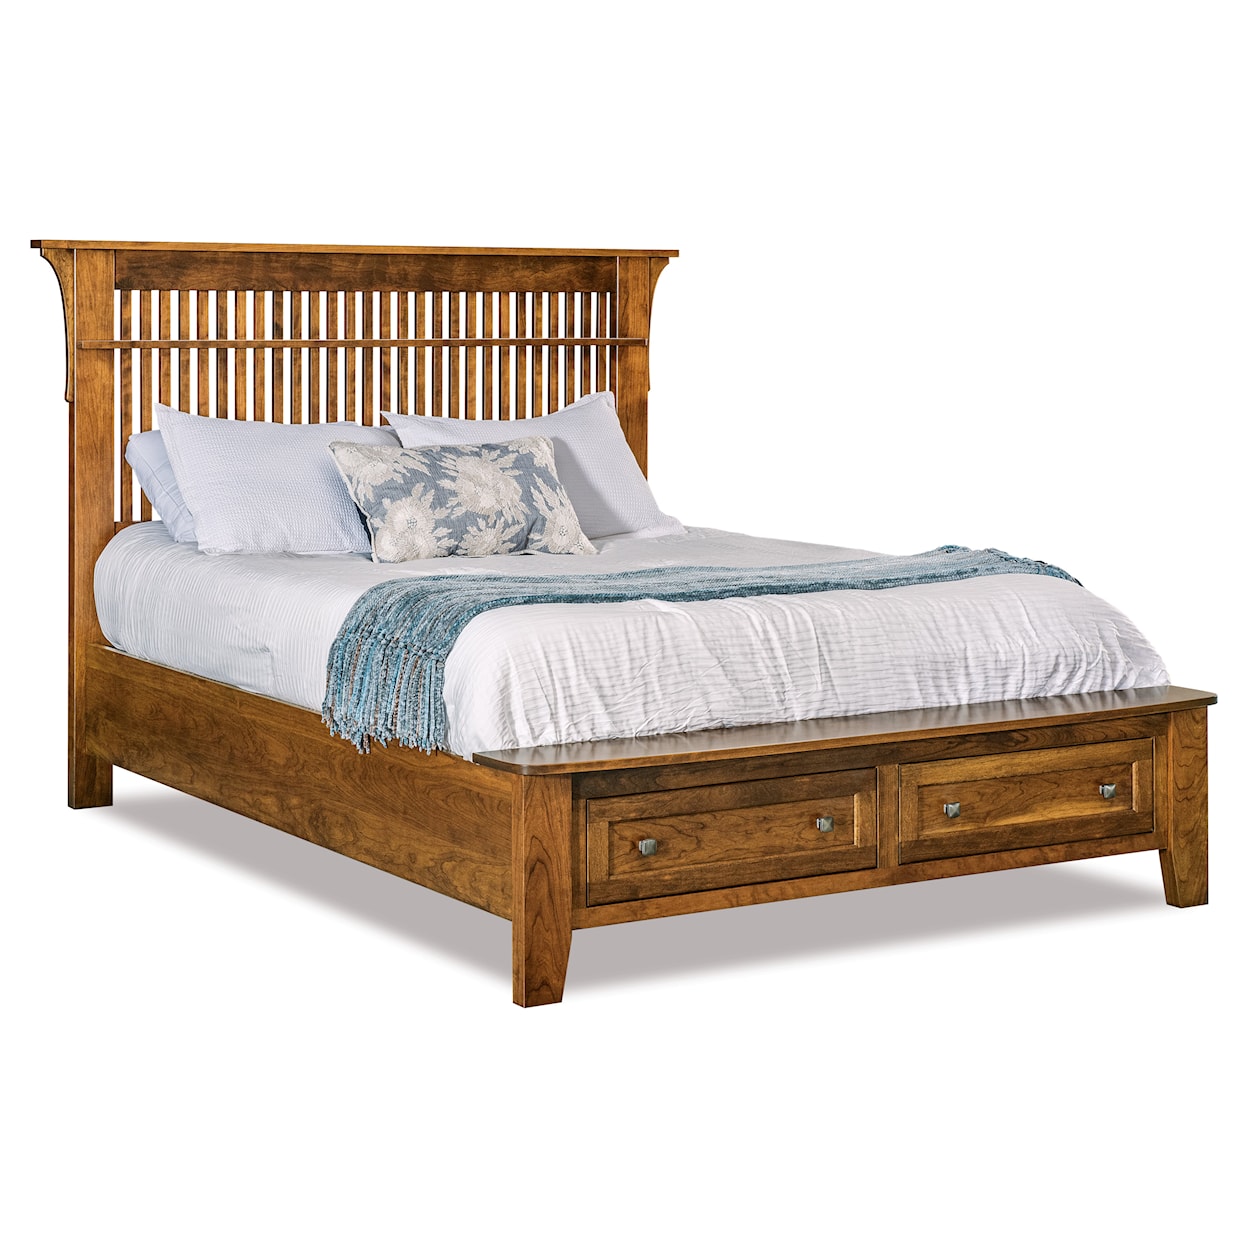 Archbold Furniture Bob Timberlake Queen Arts and Crafts Spindle Storage Bed